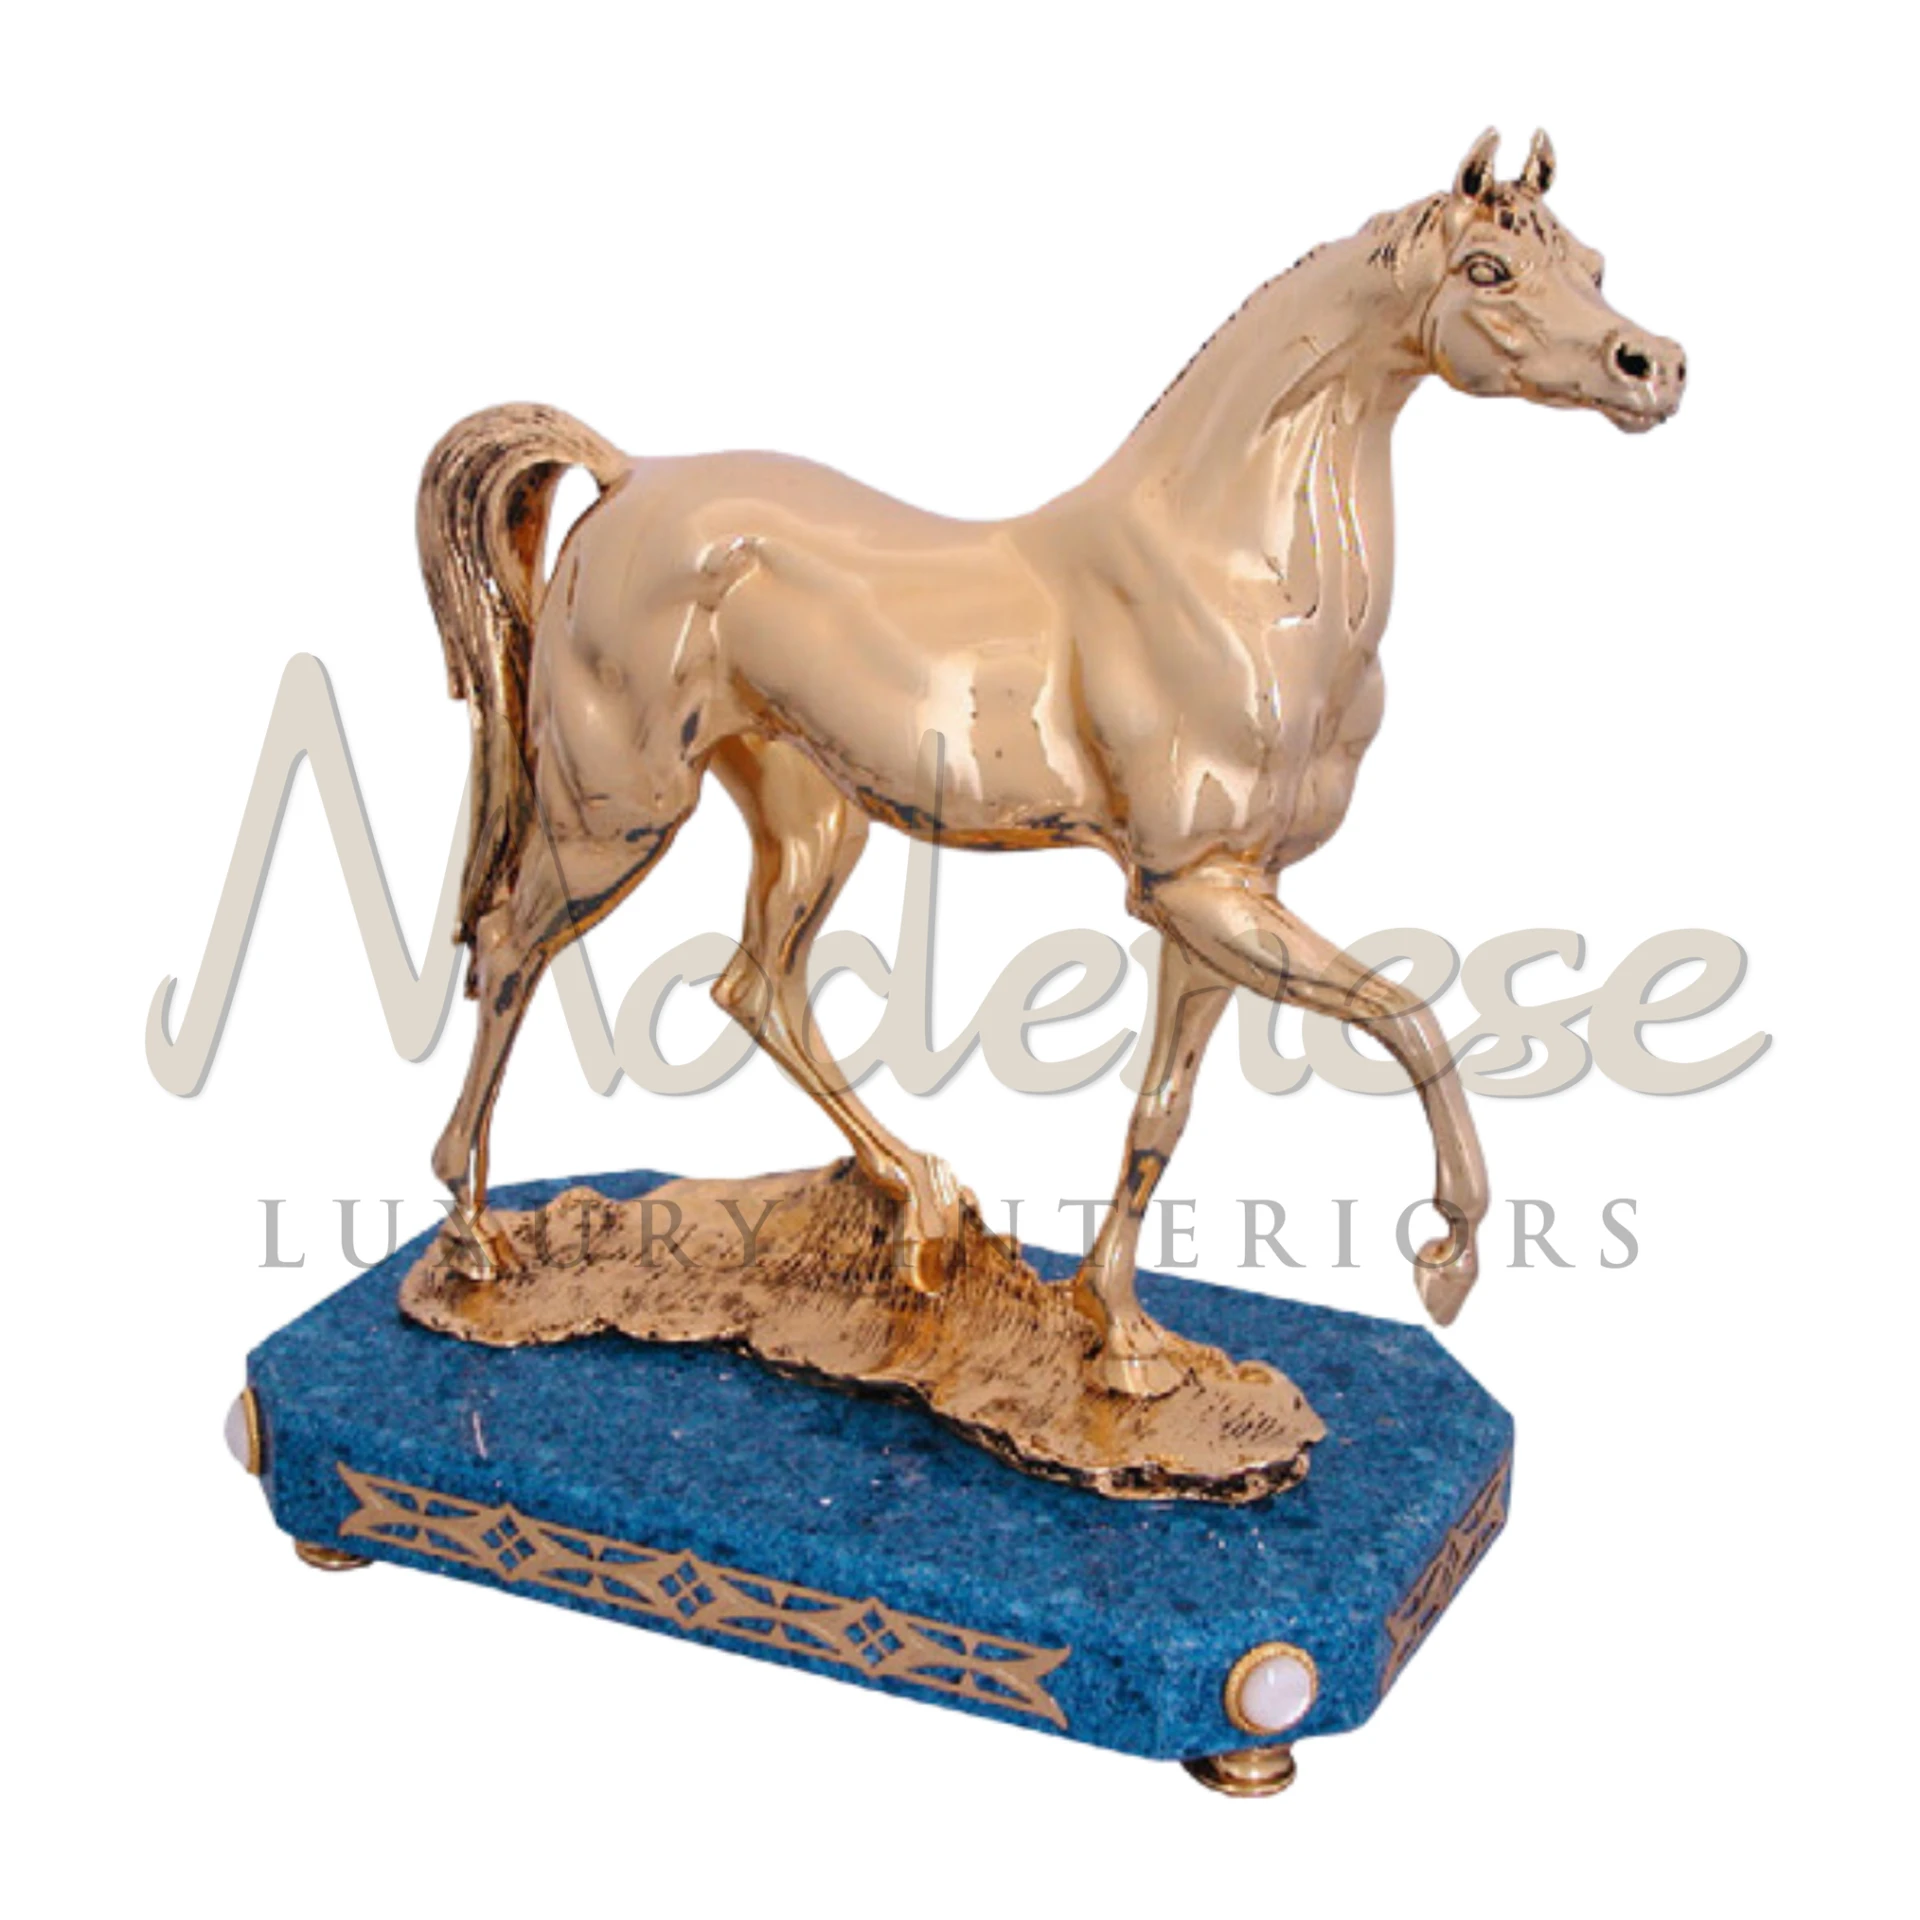 Designer Gold Horse in realistic or abstract styles, showcasing elegance and grace for sophisticated interior design.